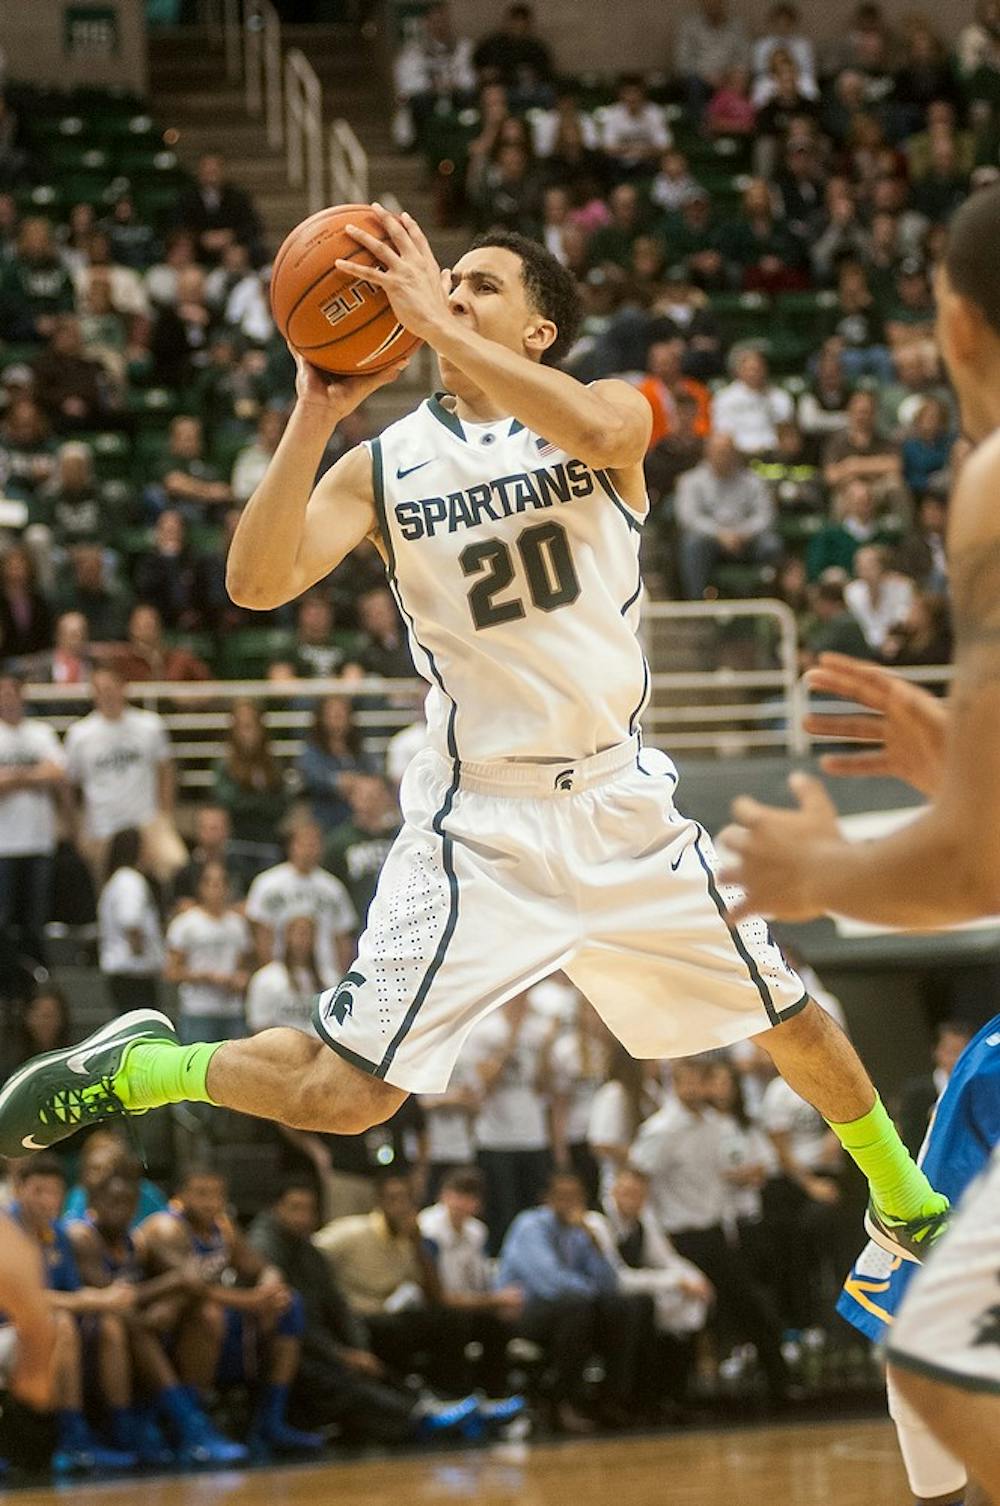 	<p>Junior guard Travis Trice shoots the ball during the game against McNeese State on Nov. 8, 2013, at Breslin Center. The Spartans defeated the Cowboys, 98-56. Khoa Nguyen/The State News</p>